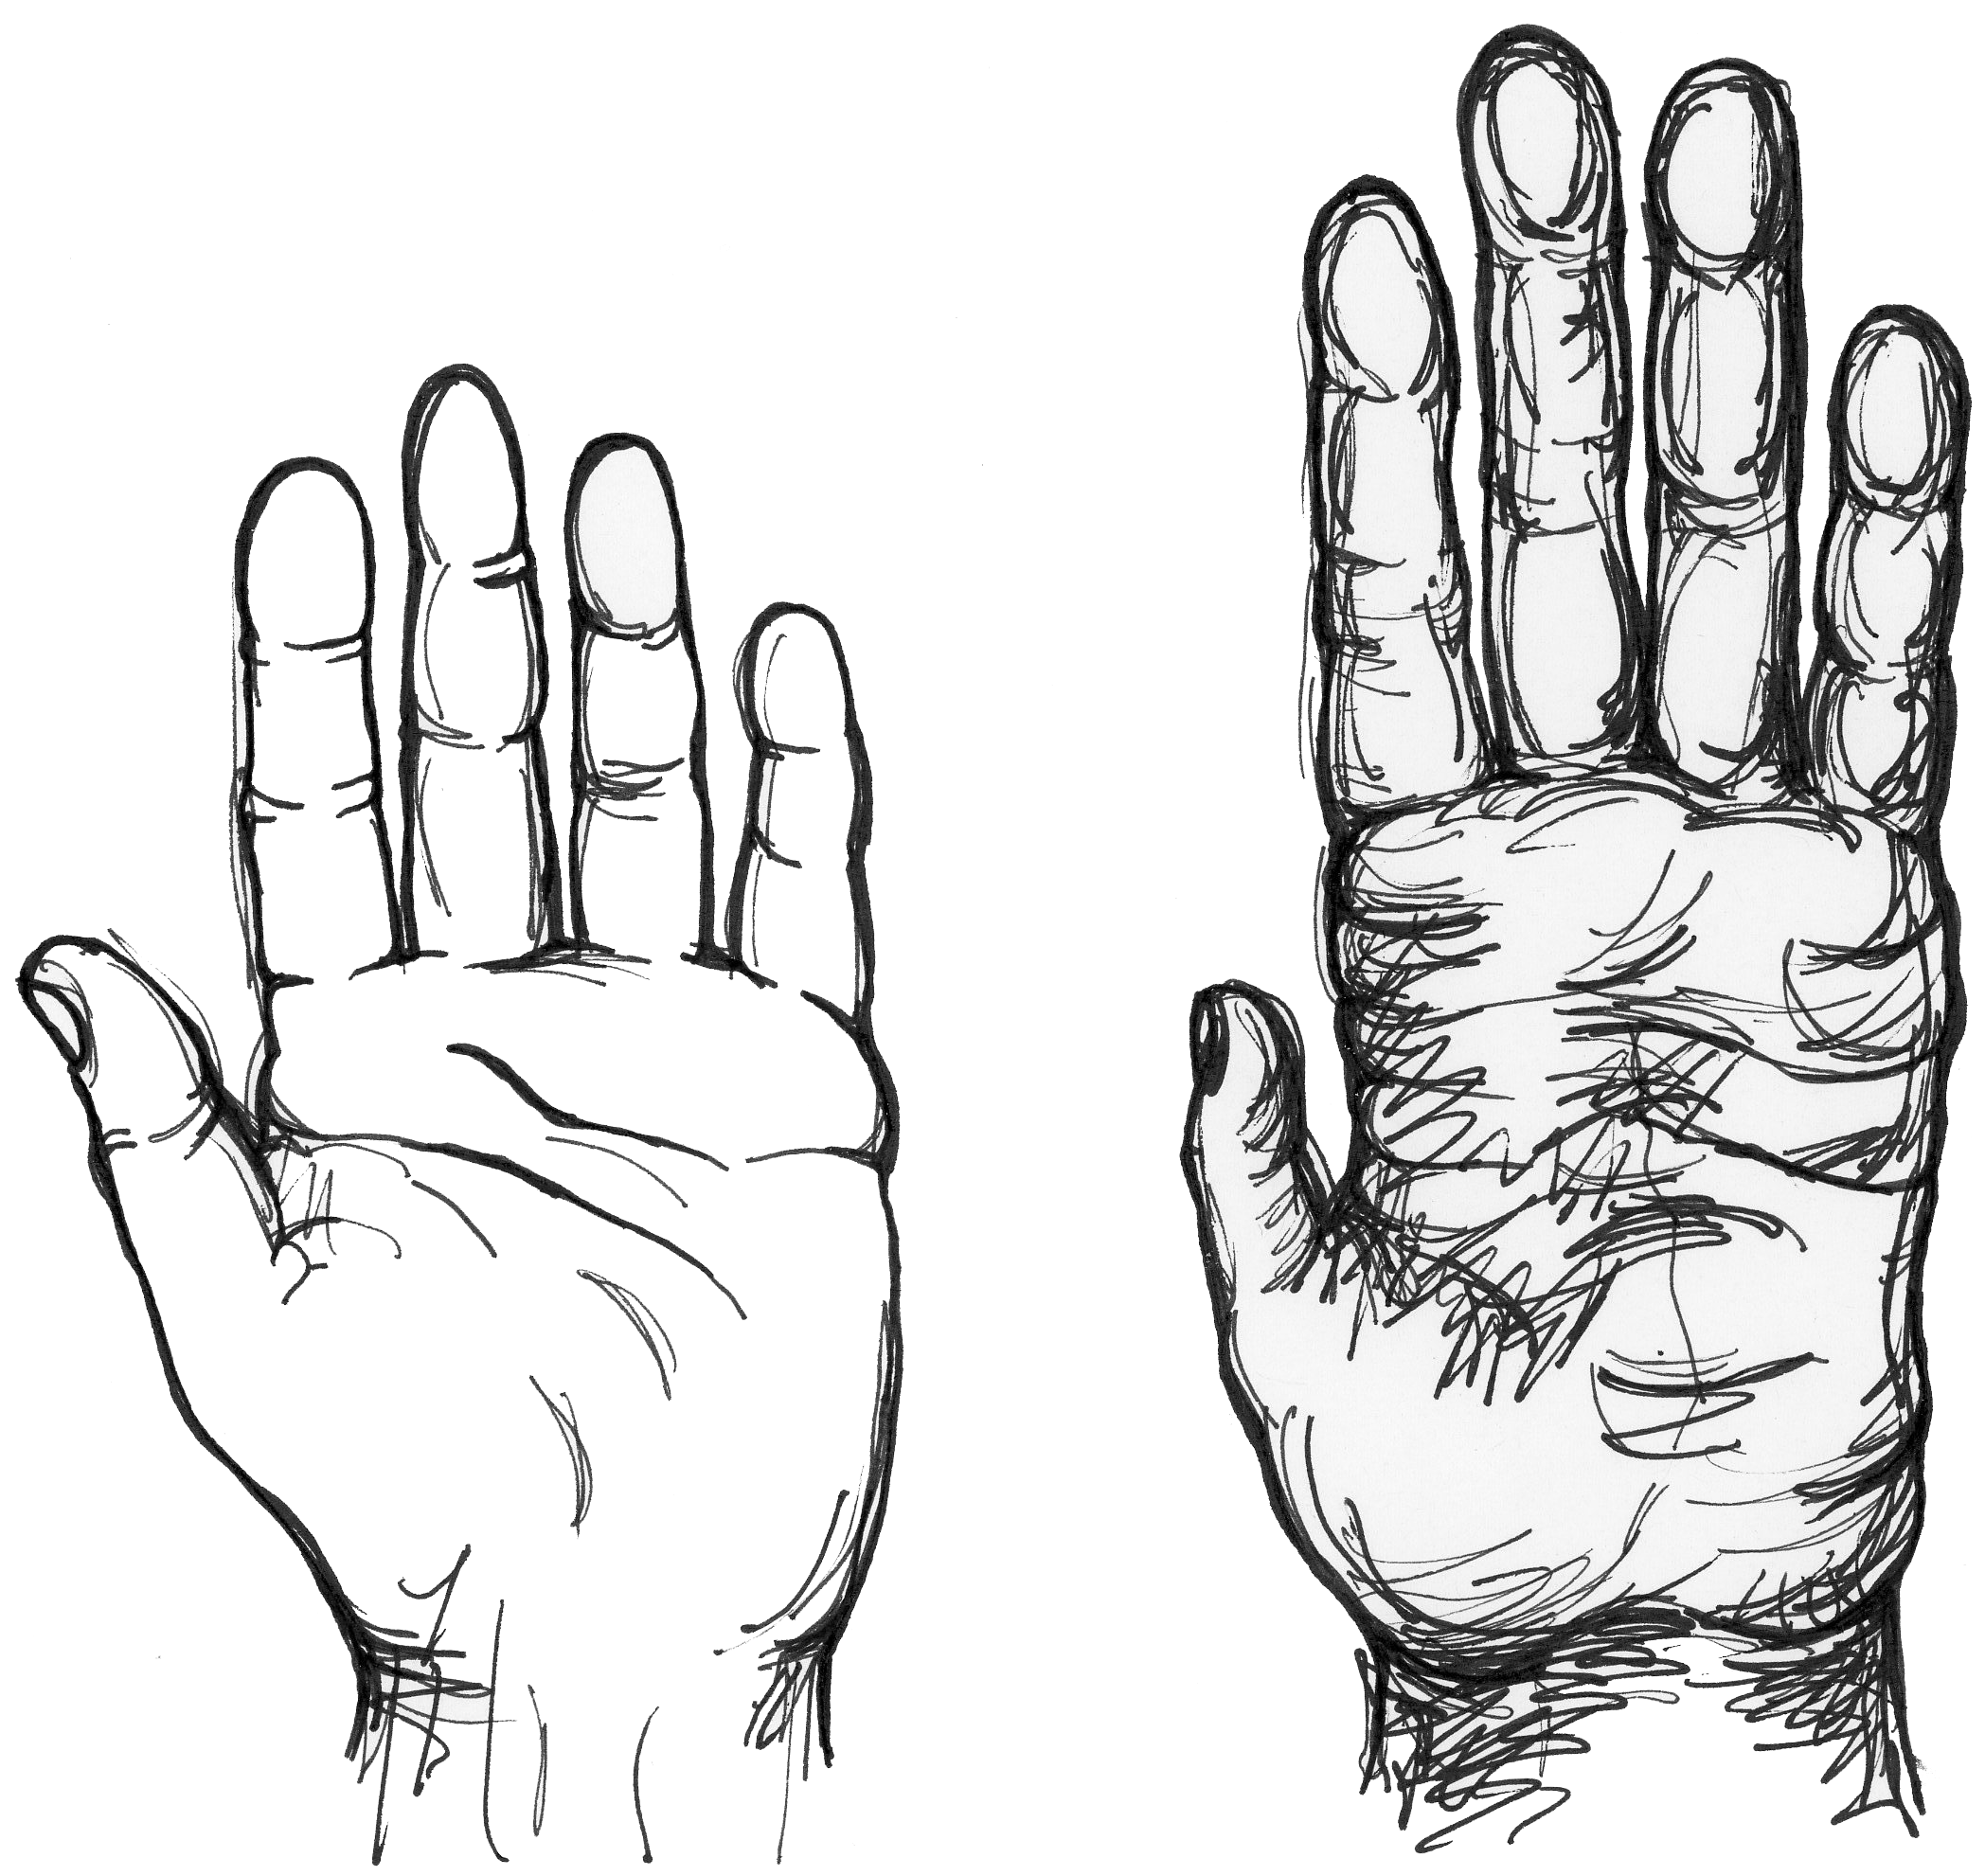 Human hand is smaller with smaller fingers and smoother skin compared to a chimpanzee hand.